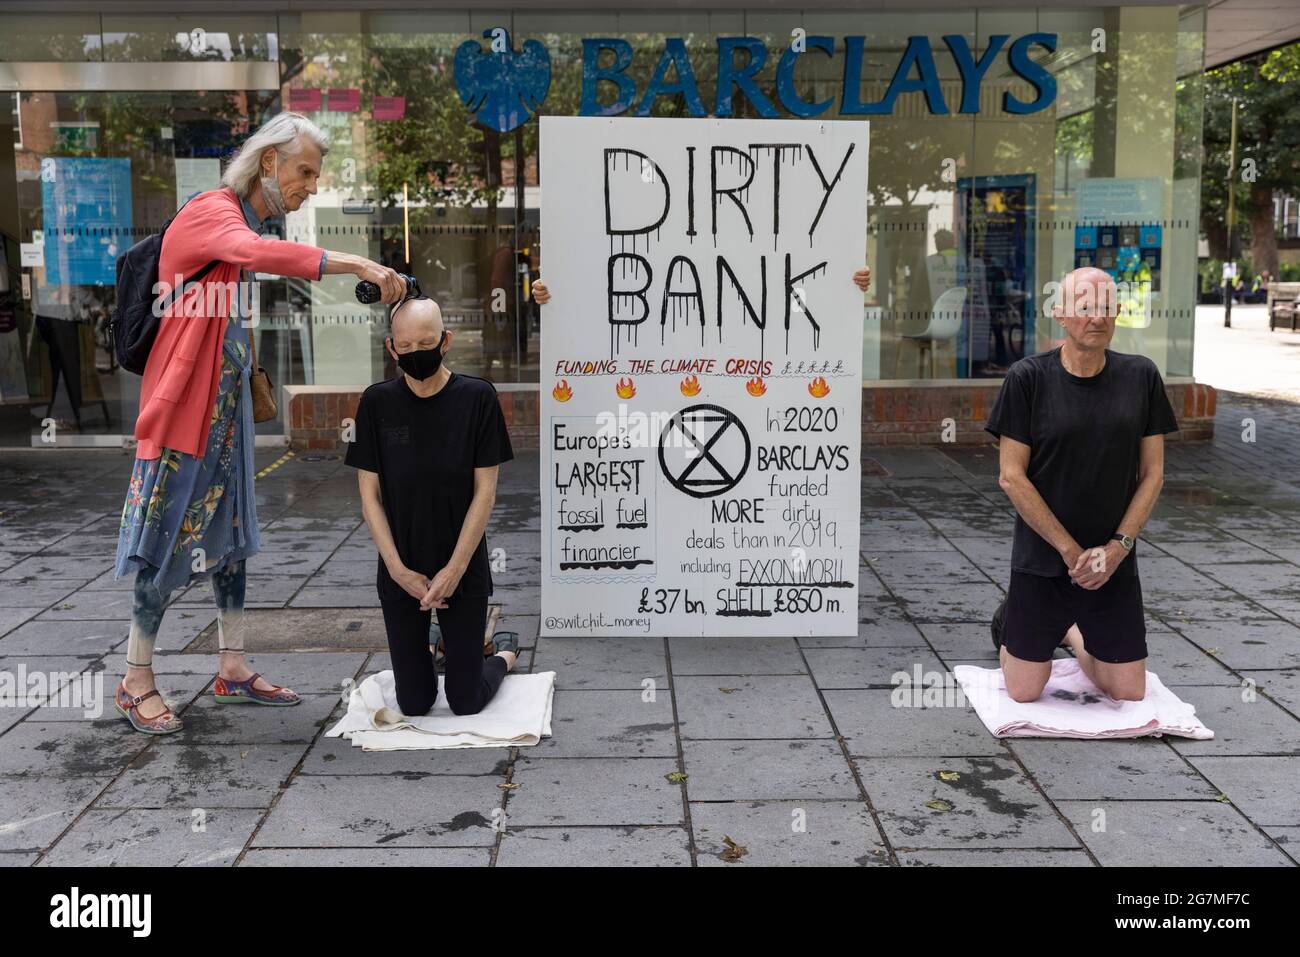 Climate protesters outside a Barclays Bank demonstrating against the banks financial investment in fossil fuels, St Albans, Hertfordshire, England, UK Stock Photo